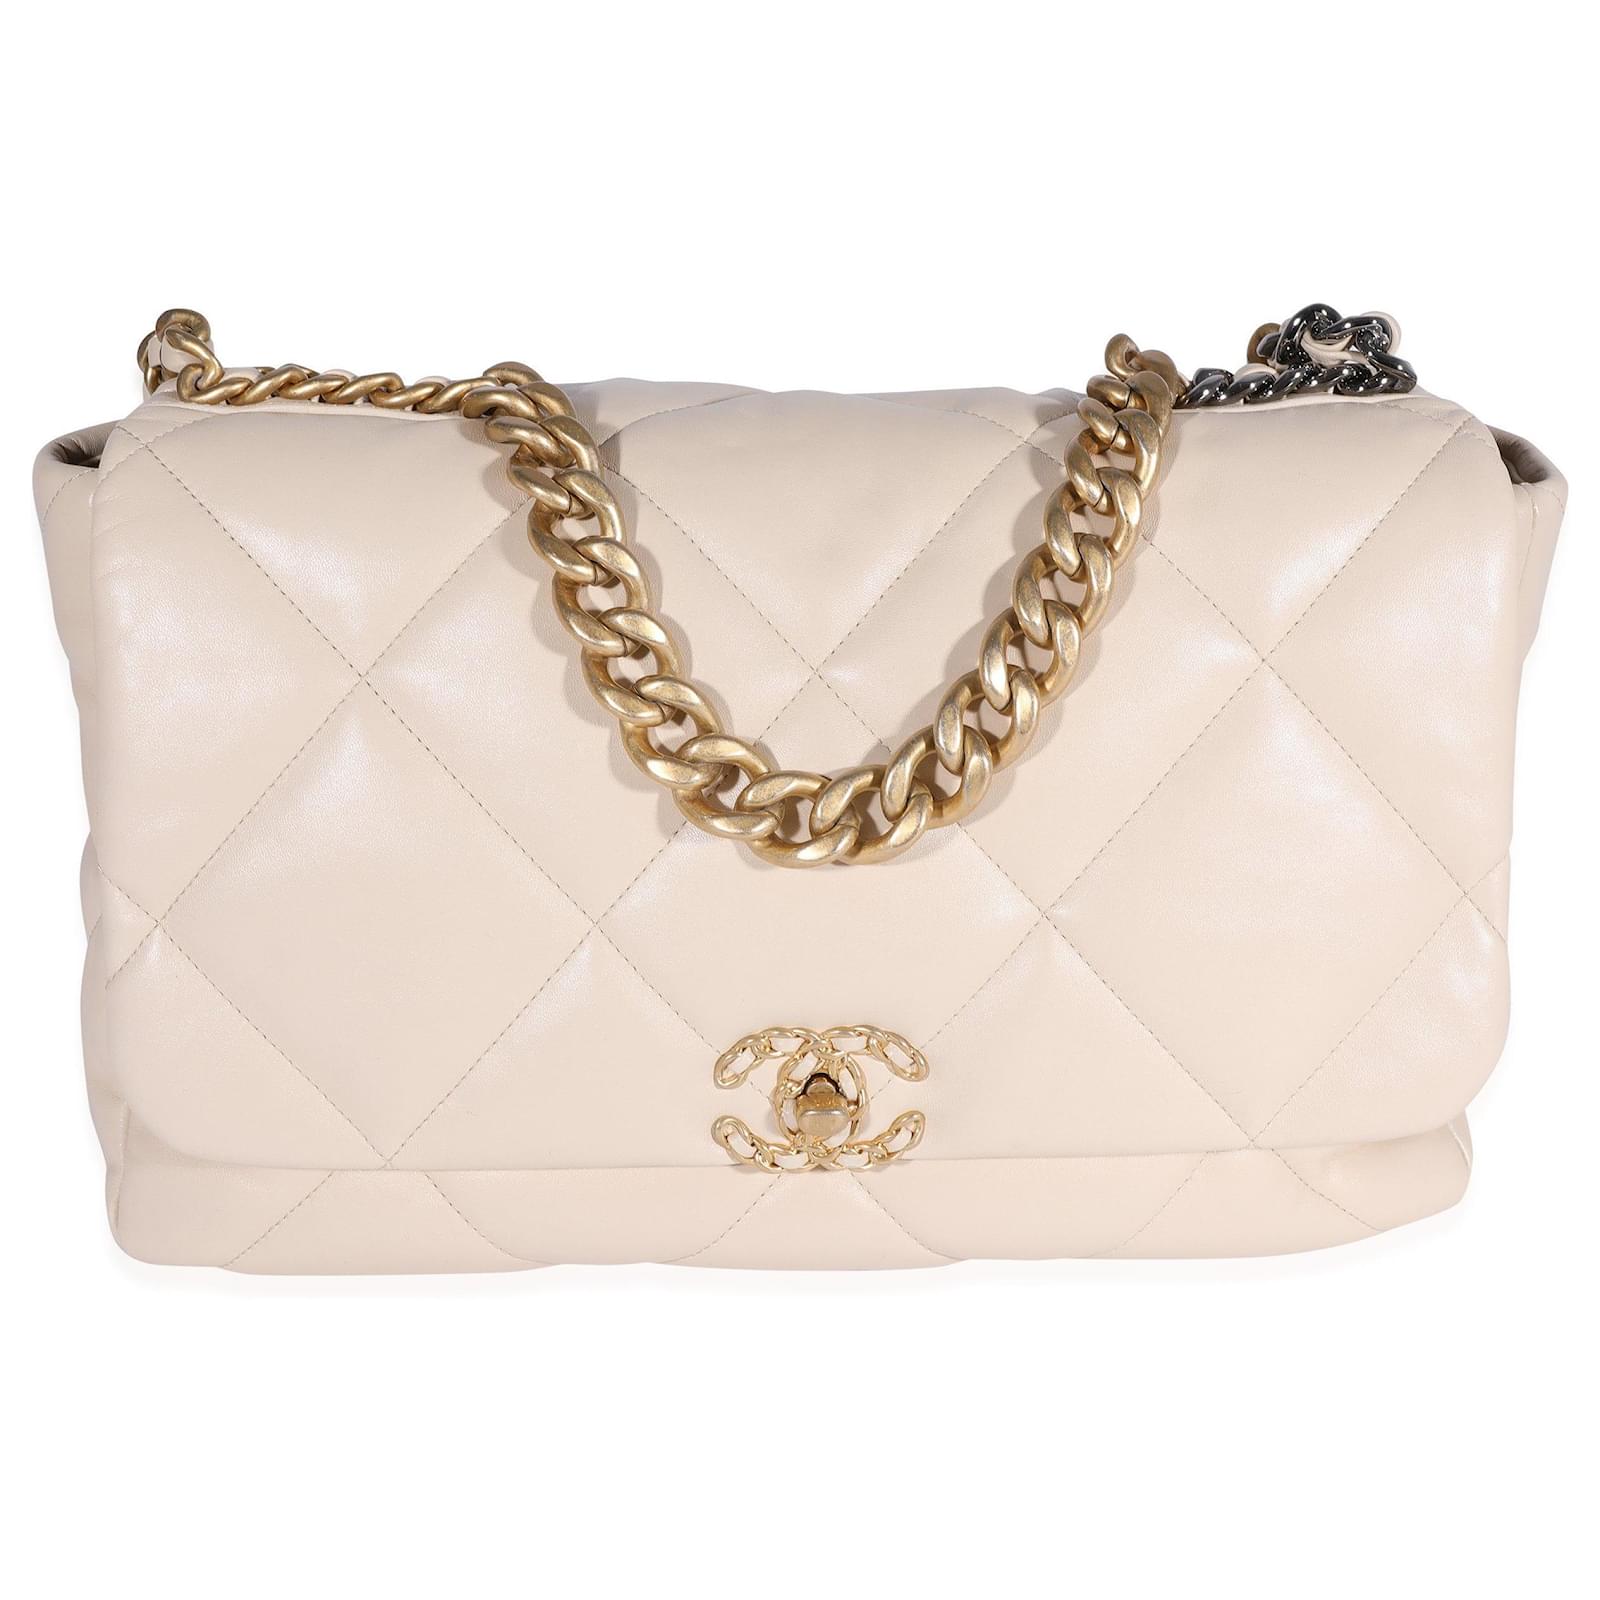 Chanel 19 Flap Bag Quilted Leather Maxi Neutral 2282171